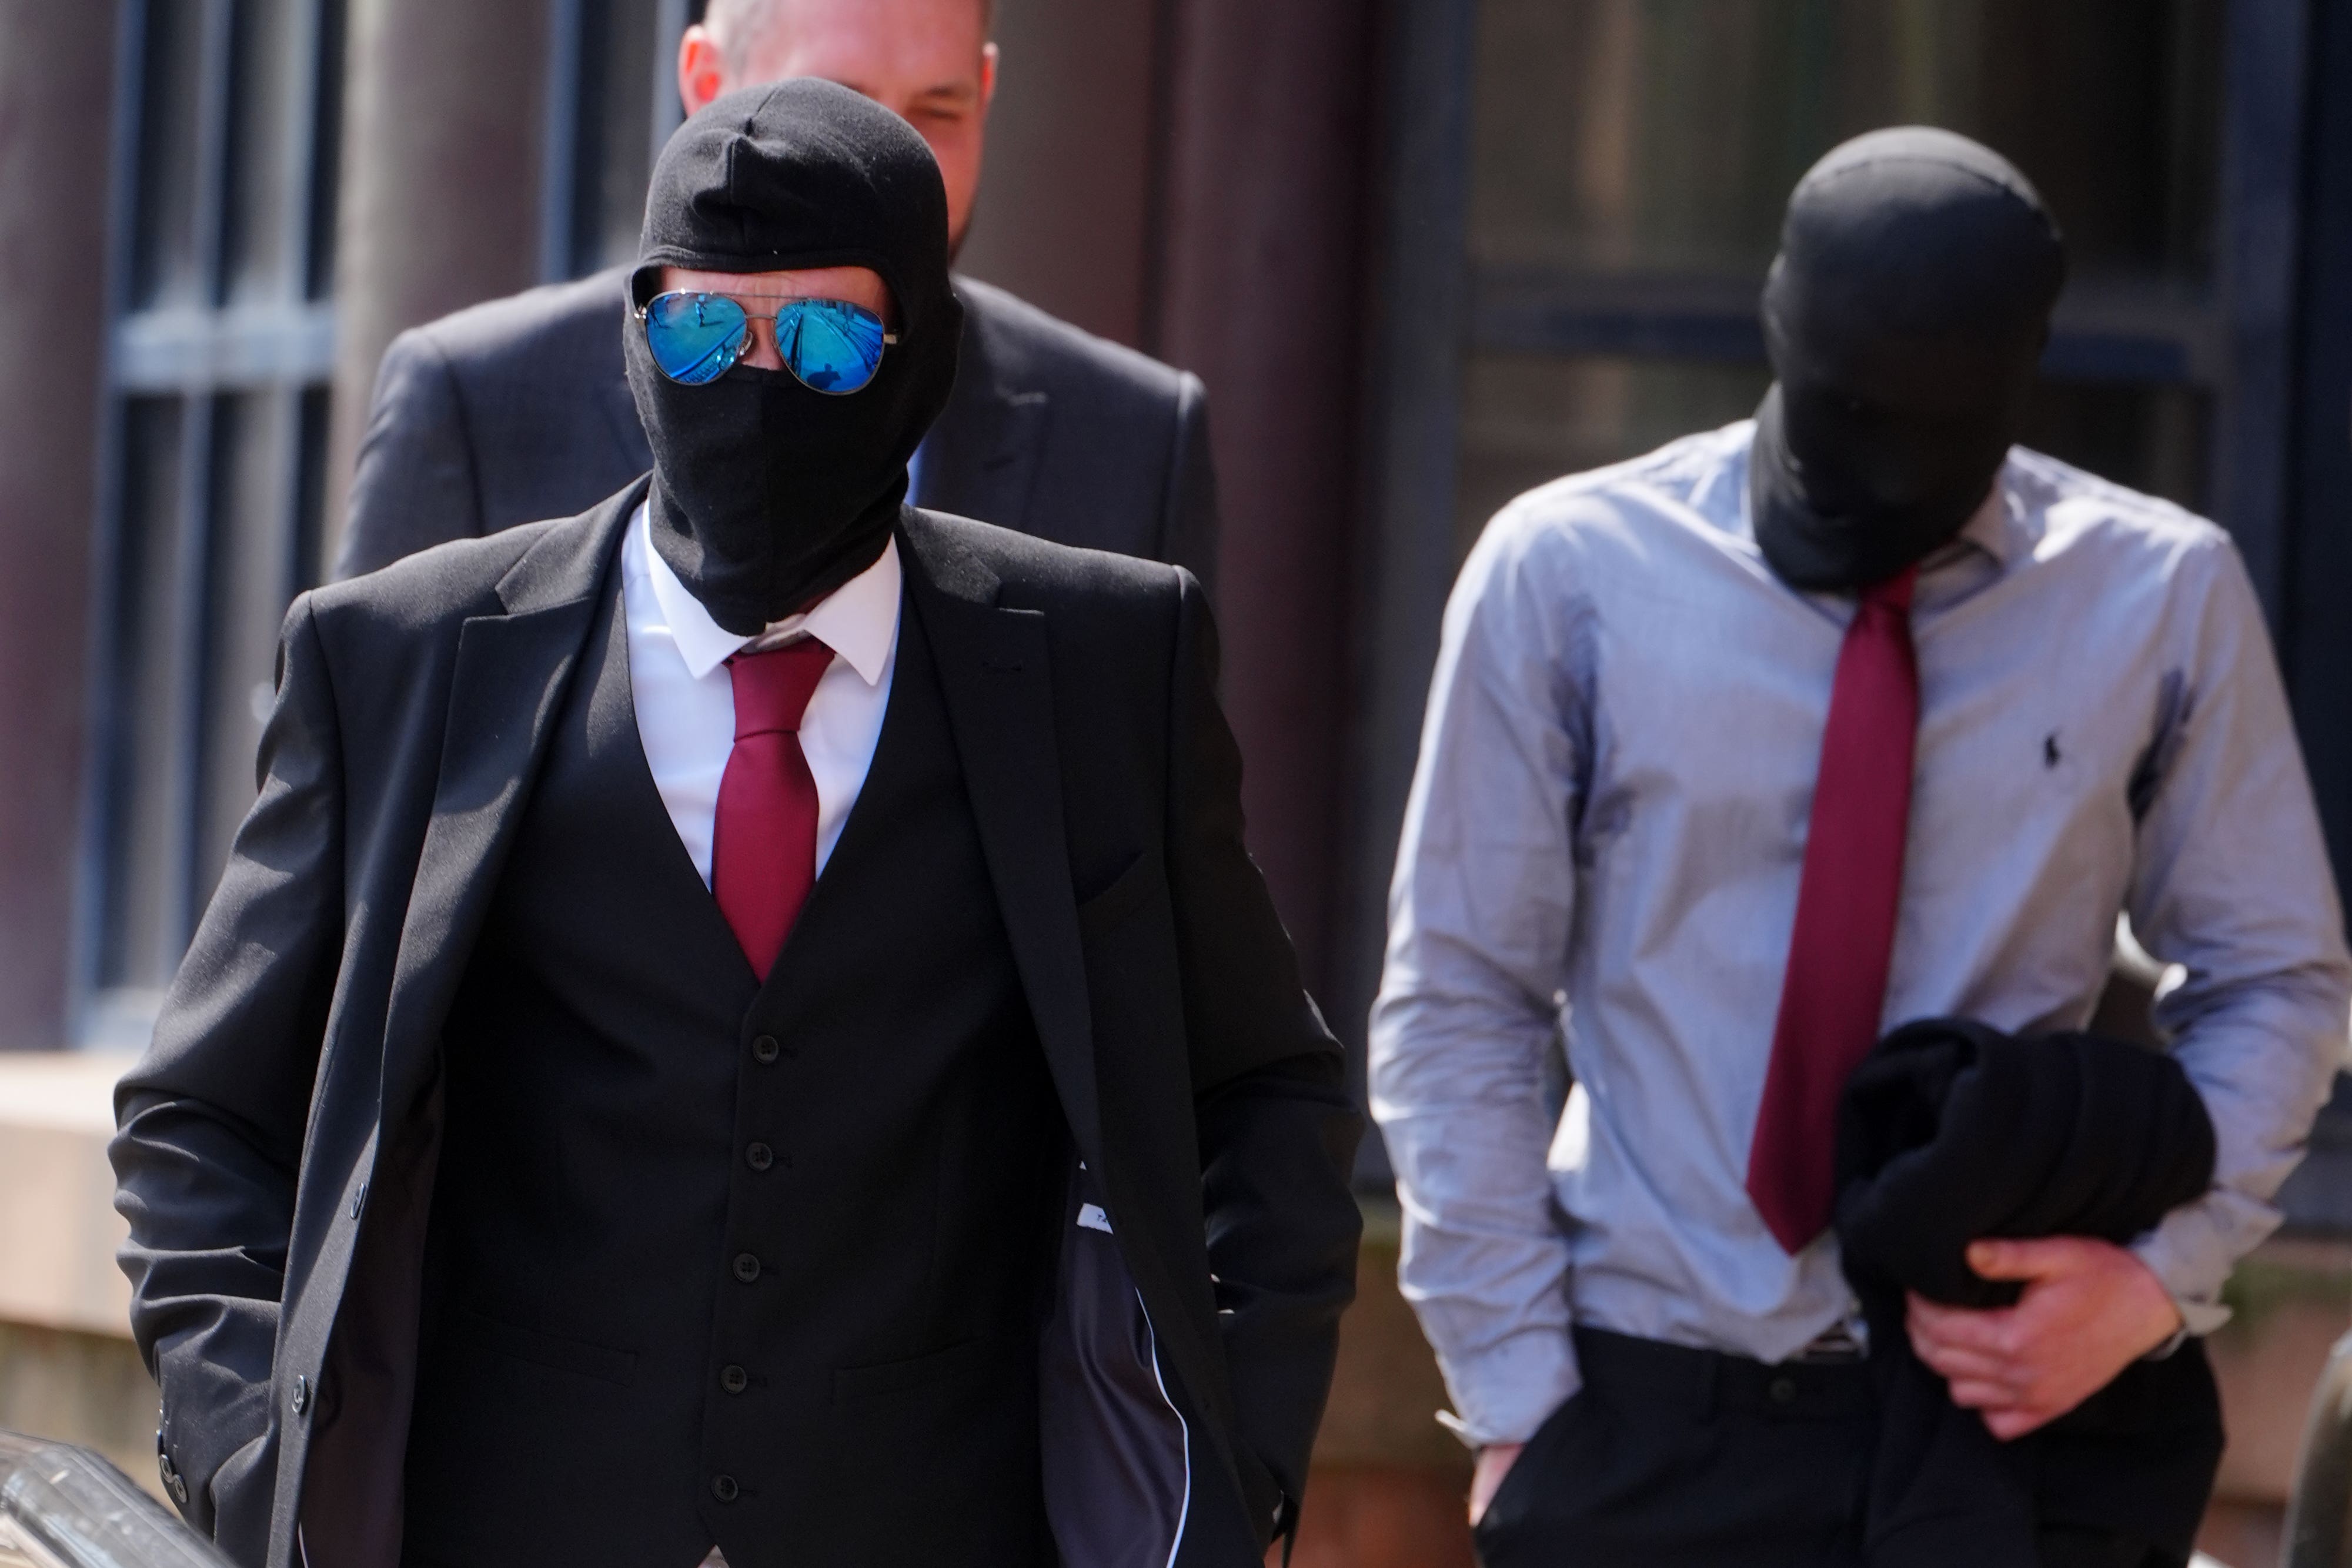 Daniel Graham, left, and Adam Carruthers, right, wore masks outside court (Owen Humphreys/PA)